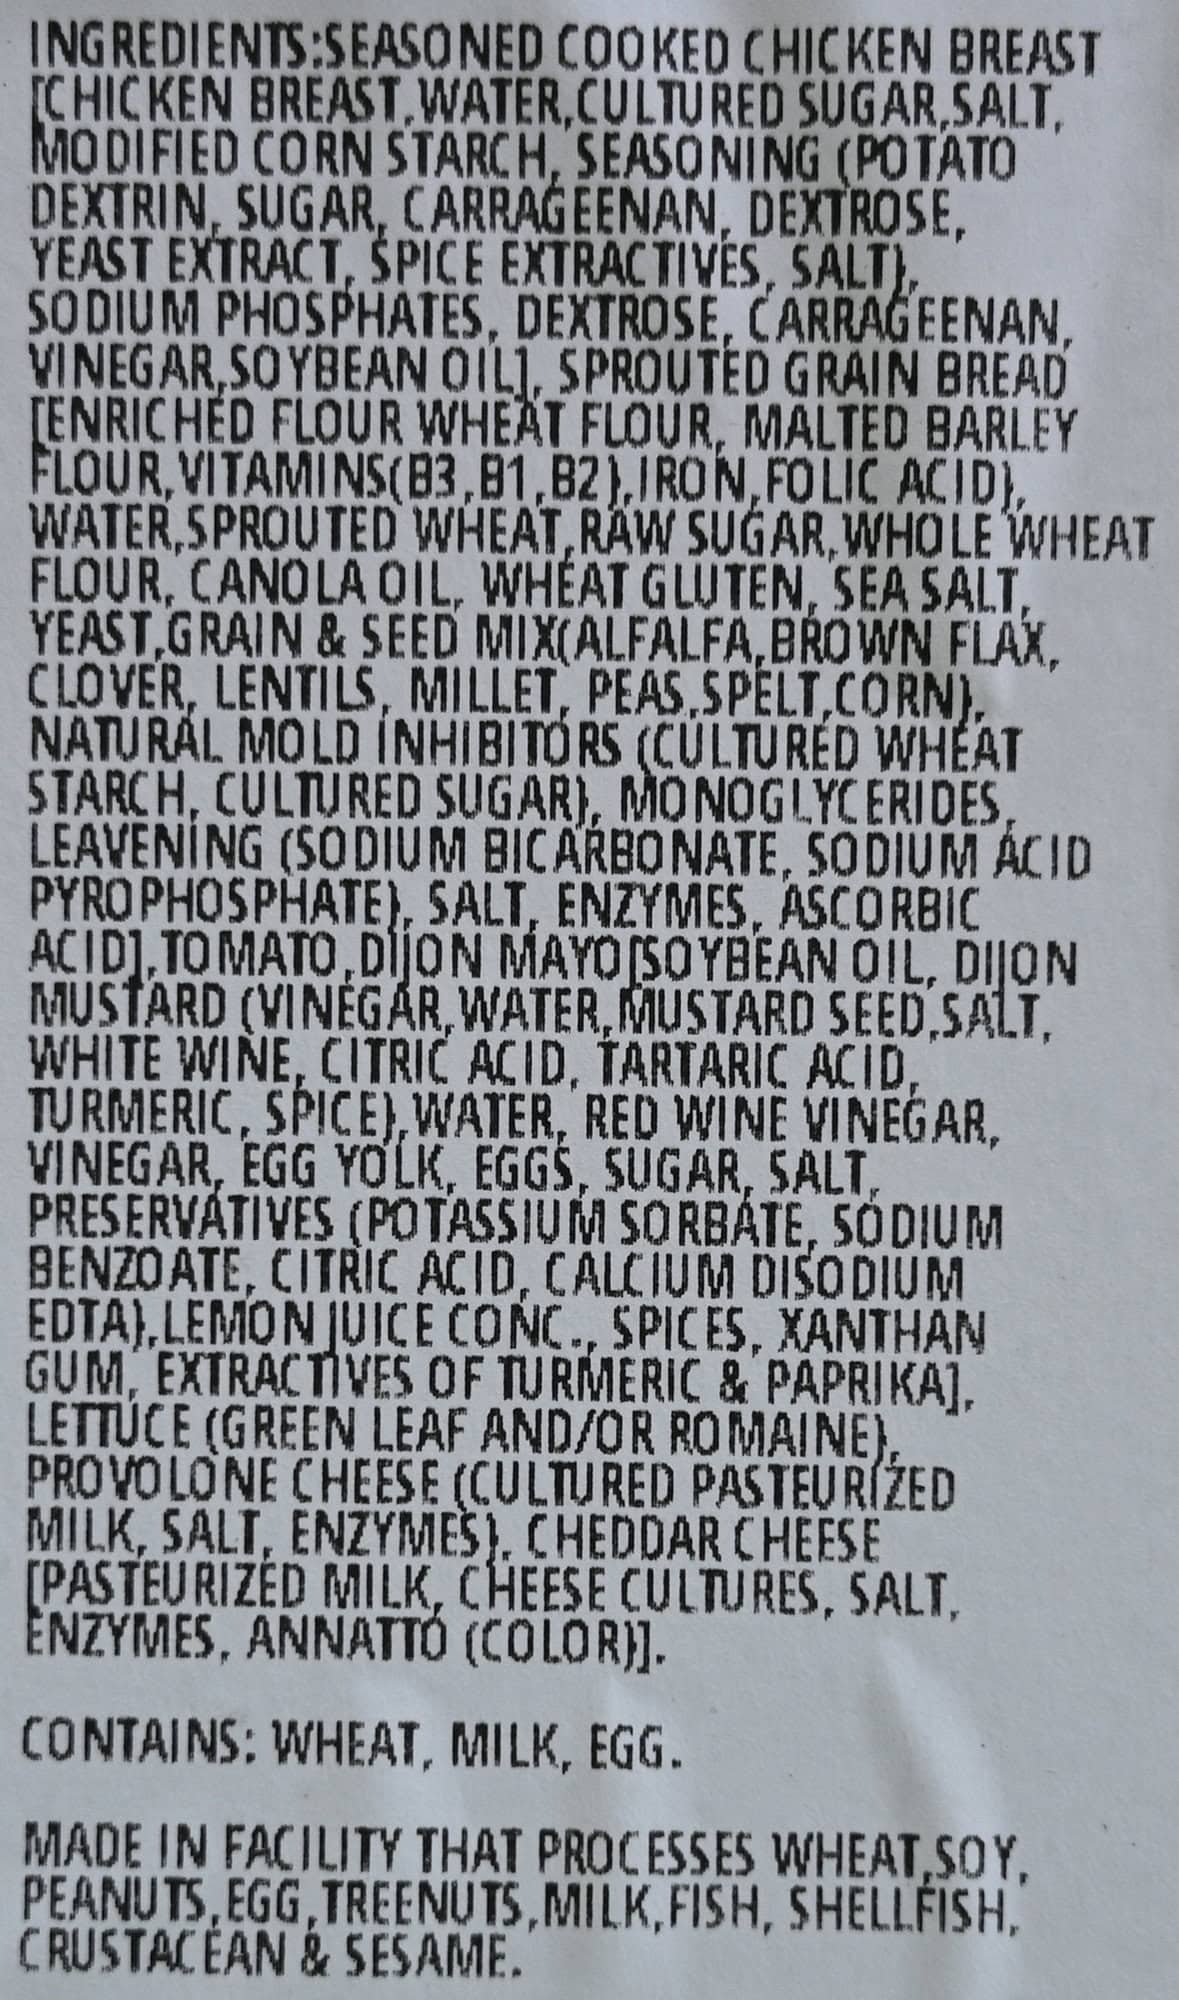 Image of the ingredients label for the sandwiches from the package.